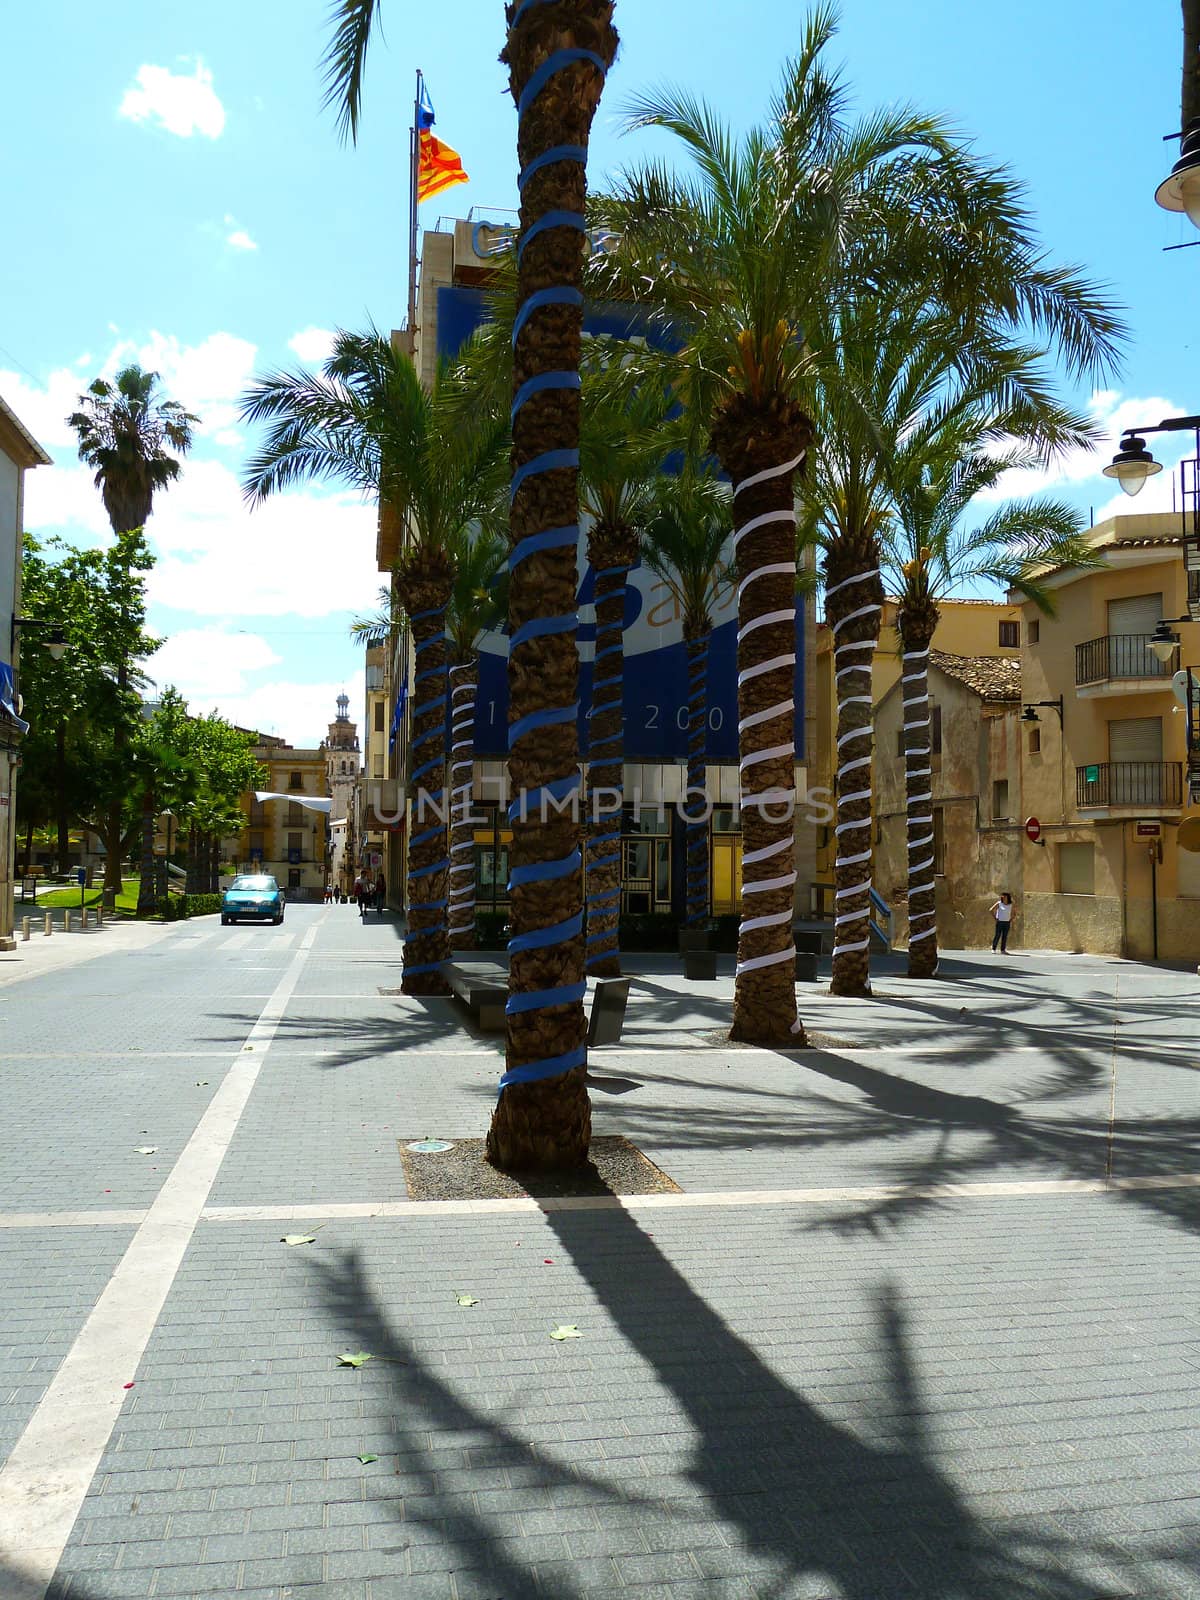 decorated palm trees by gazmoi